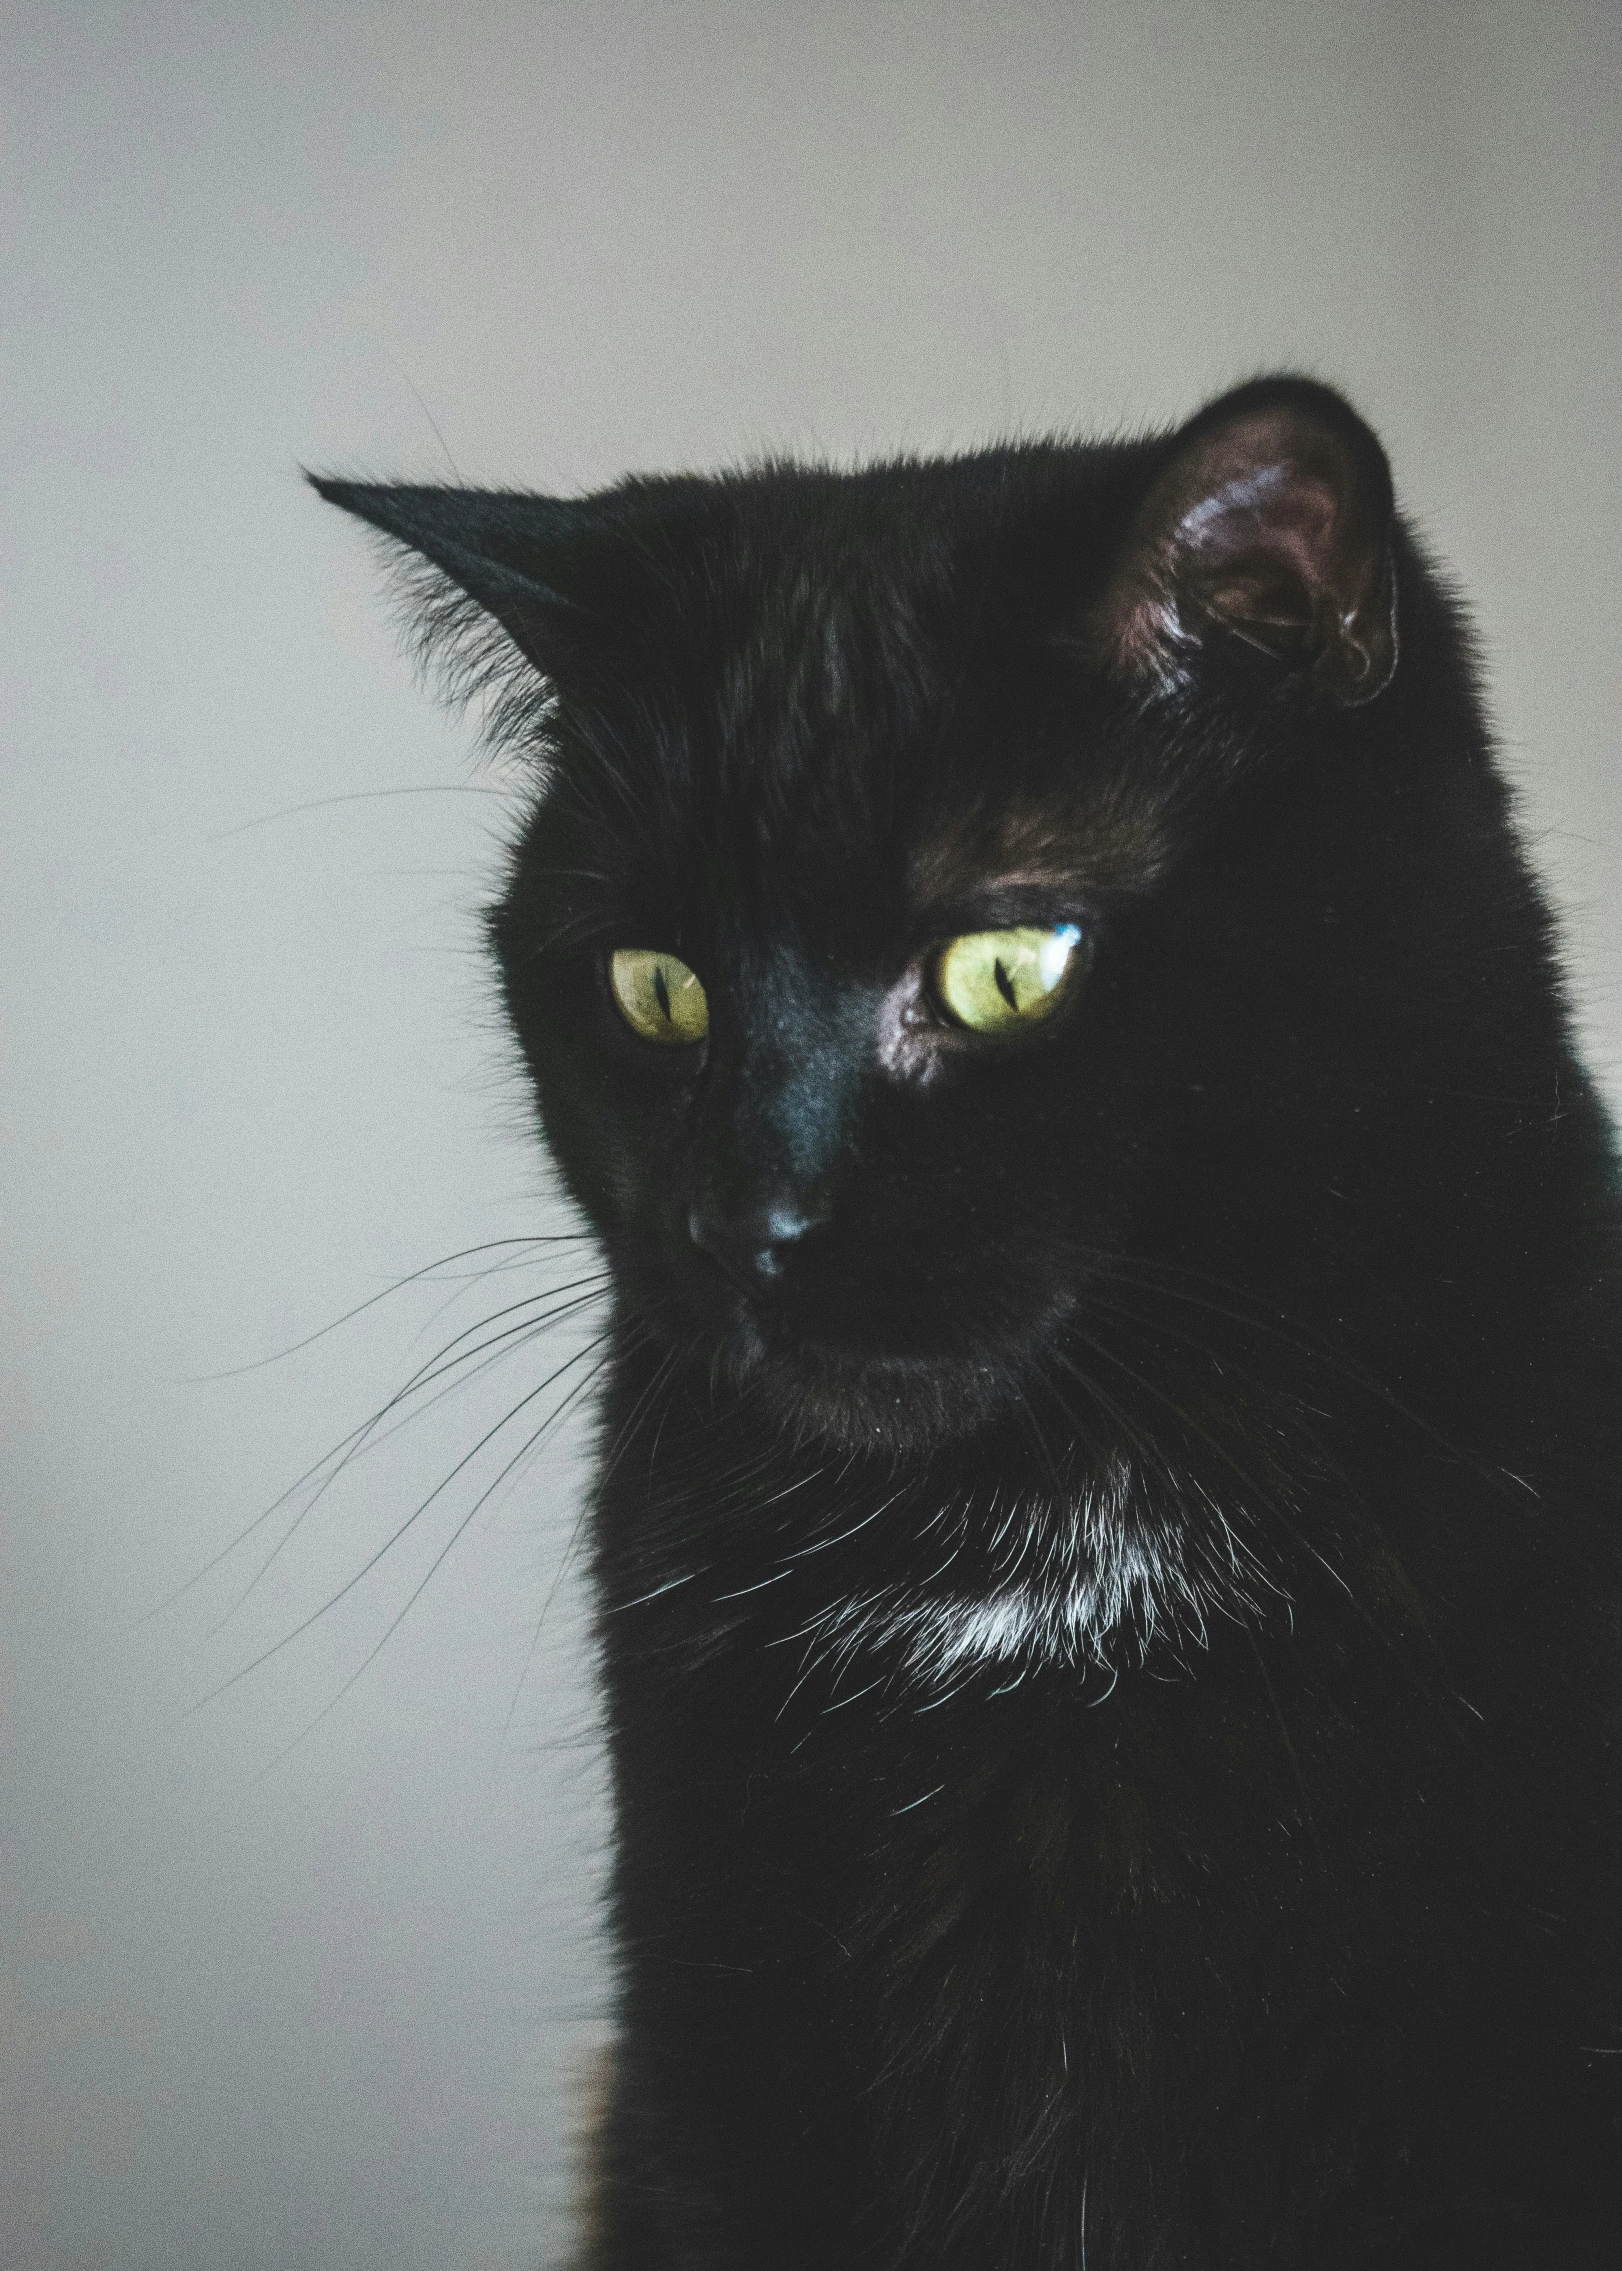 a black cat with yellow eyes sits and stares